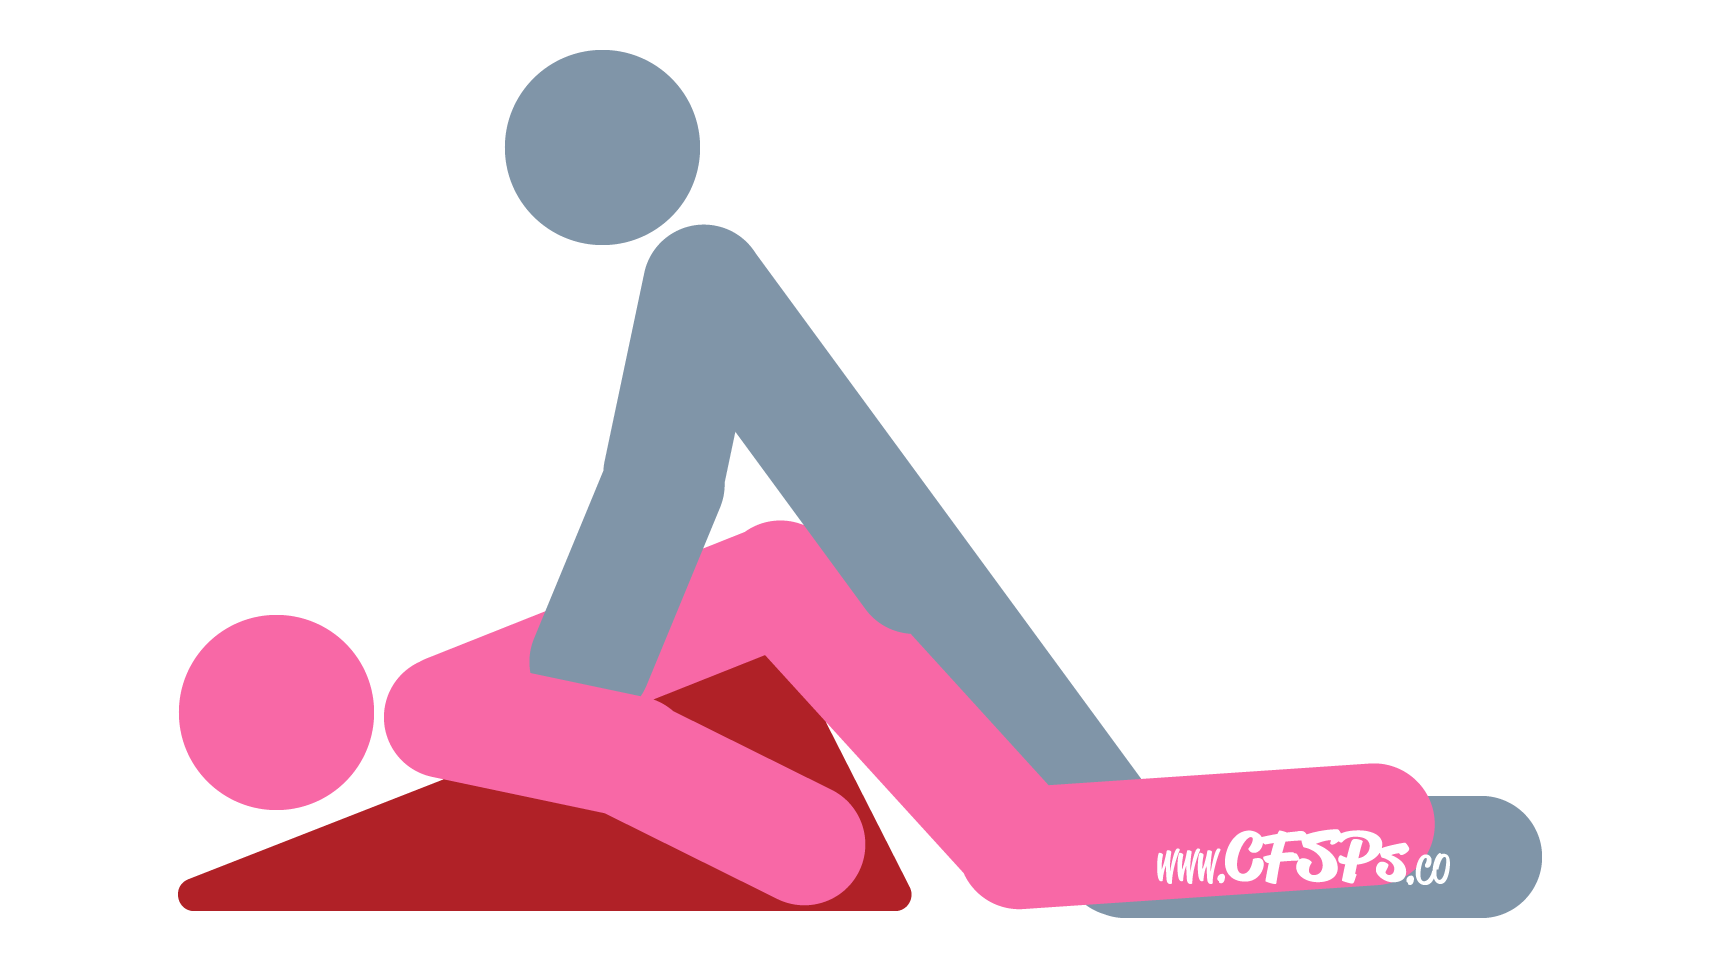 This stick figure image depicts a man and woman having sex in the Pedestal sex position. The woman is lying on her stomach on a Liberator Ramp sex pillow with her pelvis on the high side and her head on the low side. The man is kneeling behind her between her legs, leaning forward, and supporting his body with his arms on each side of the sex pillow by her sides.